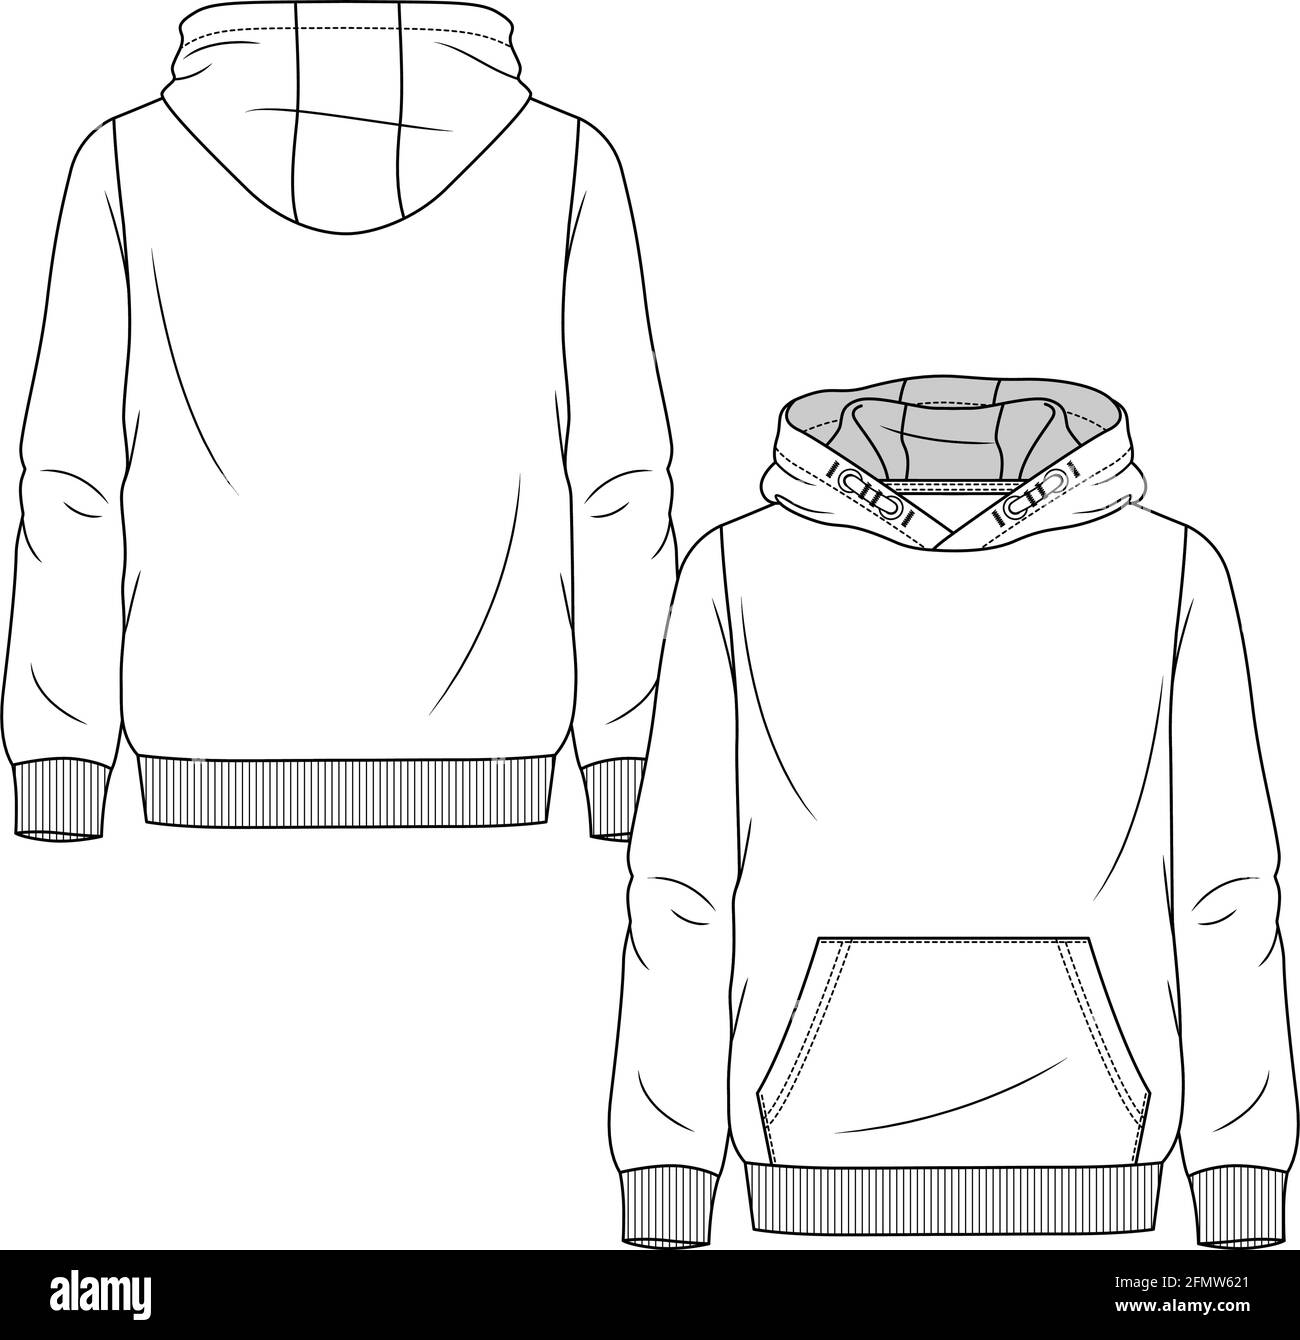 Boys Sweatshirt Hoodie fashion flat sketch template. Young men popover top Technical Fashion Illustration. Stock Vector